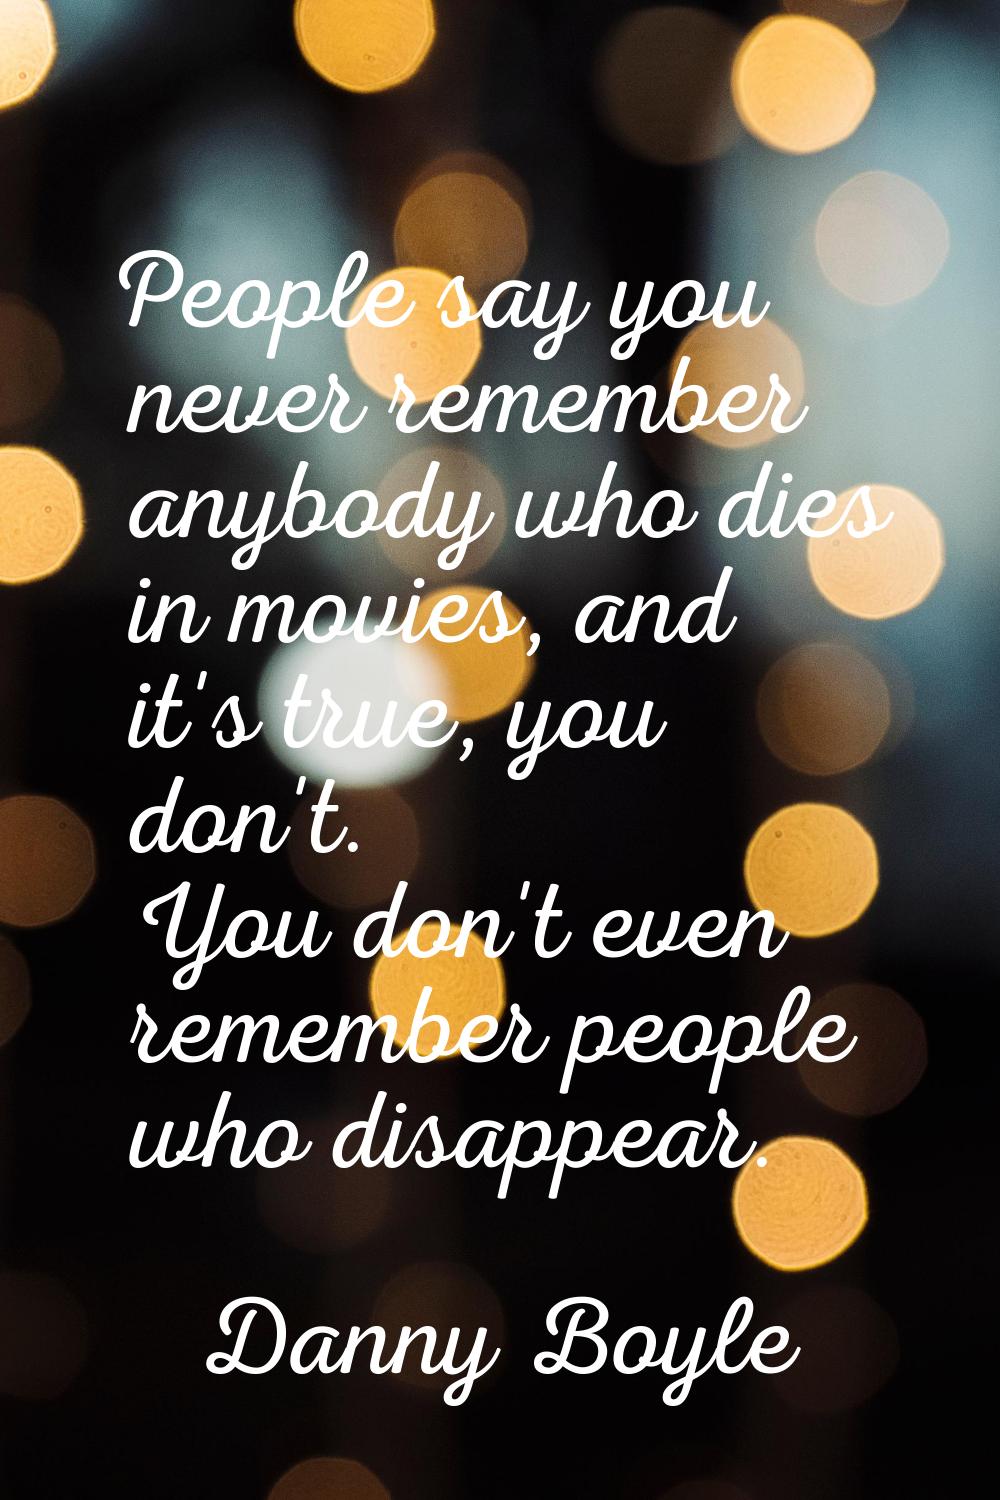 People say you never remember anybody who dies in movies, and it's true, you don't. You don't even 